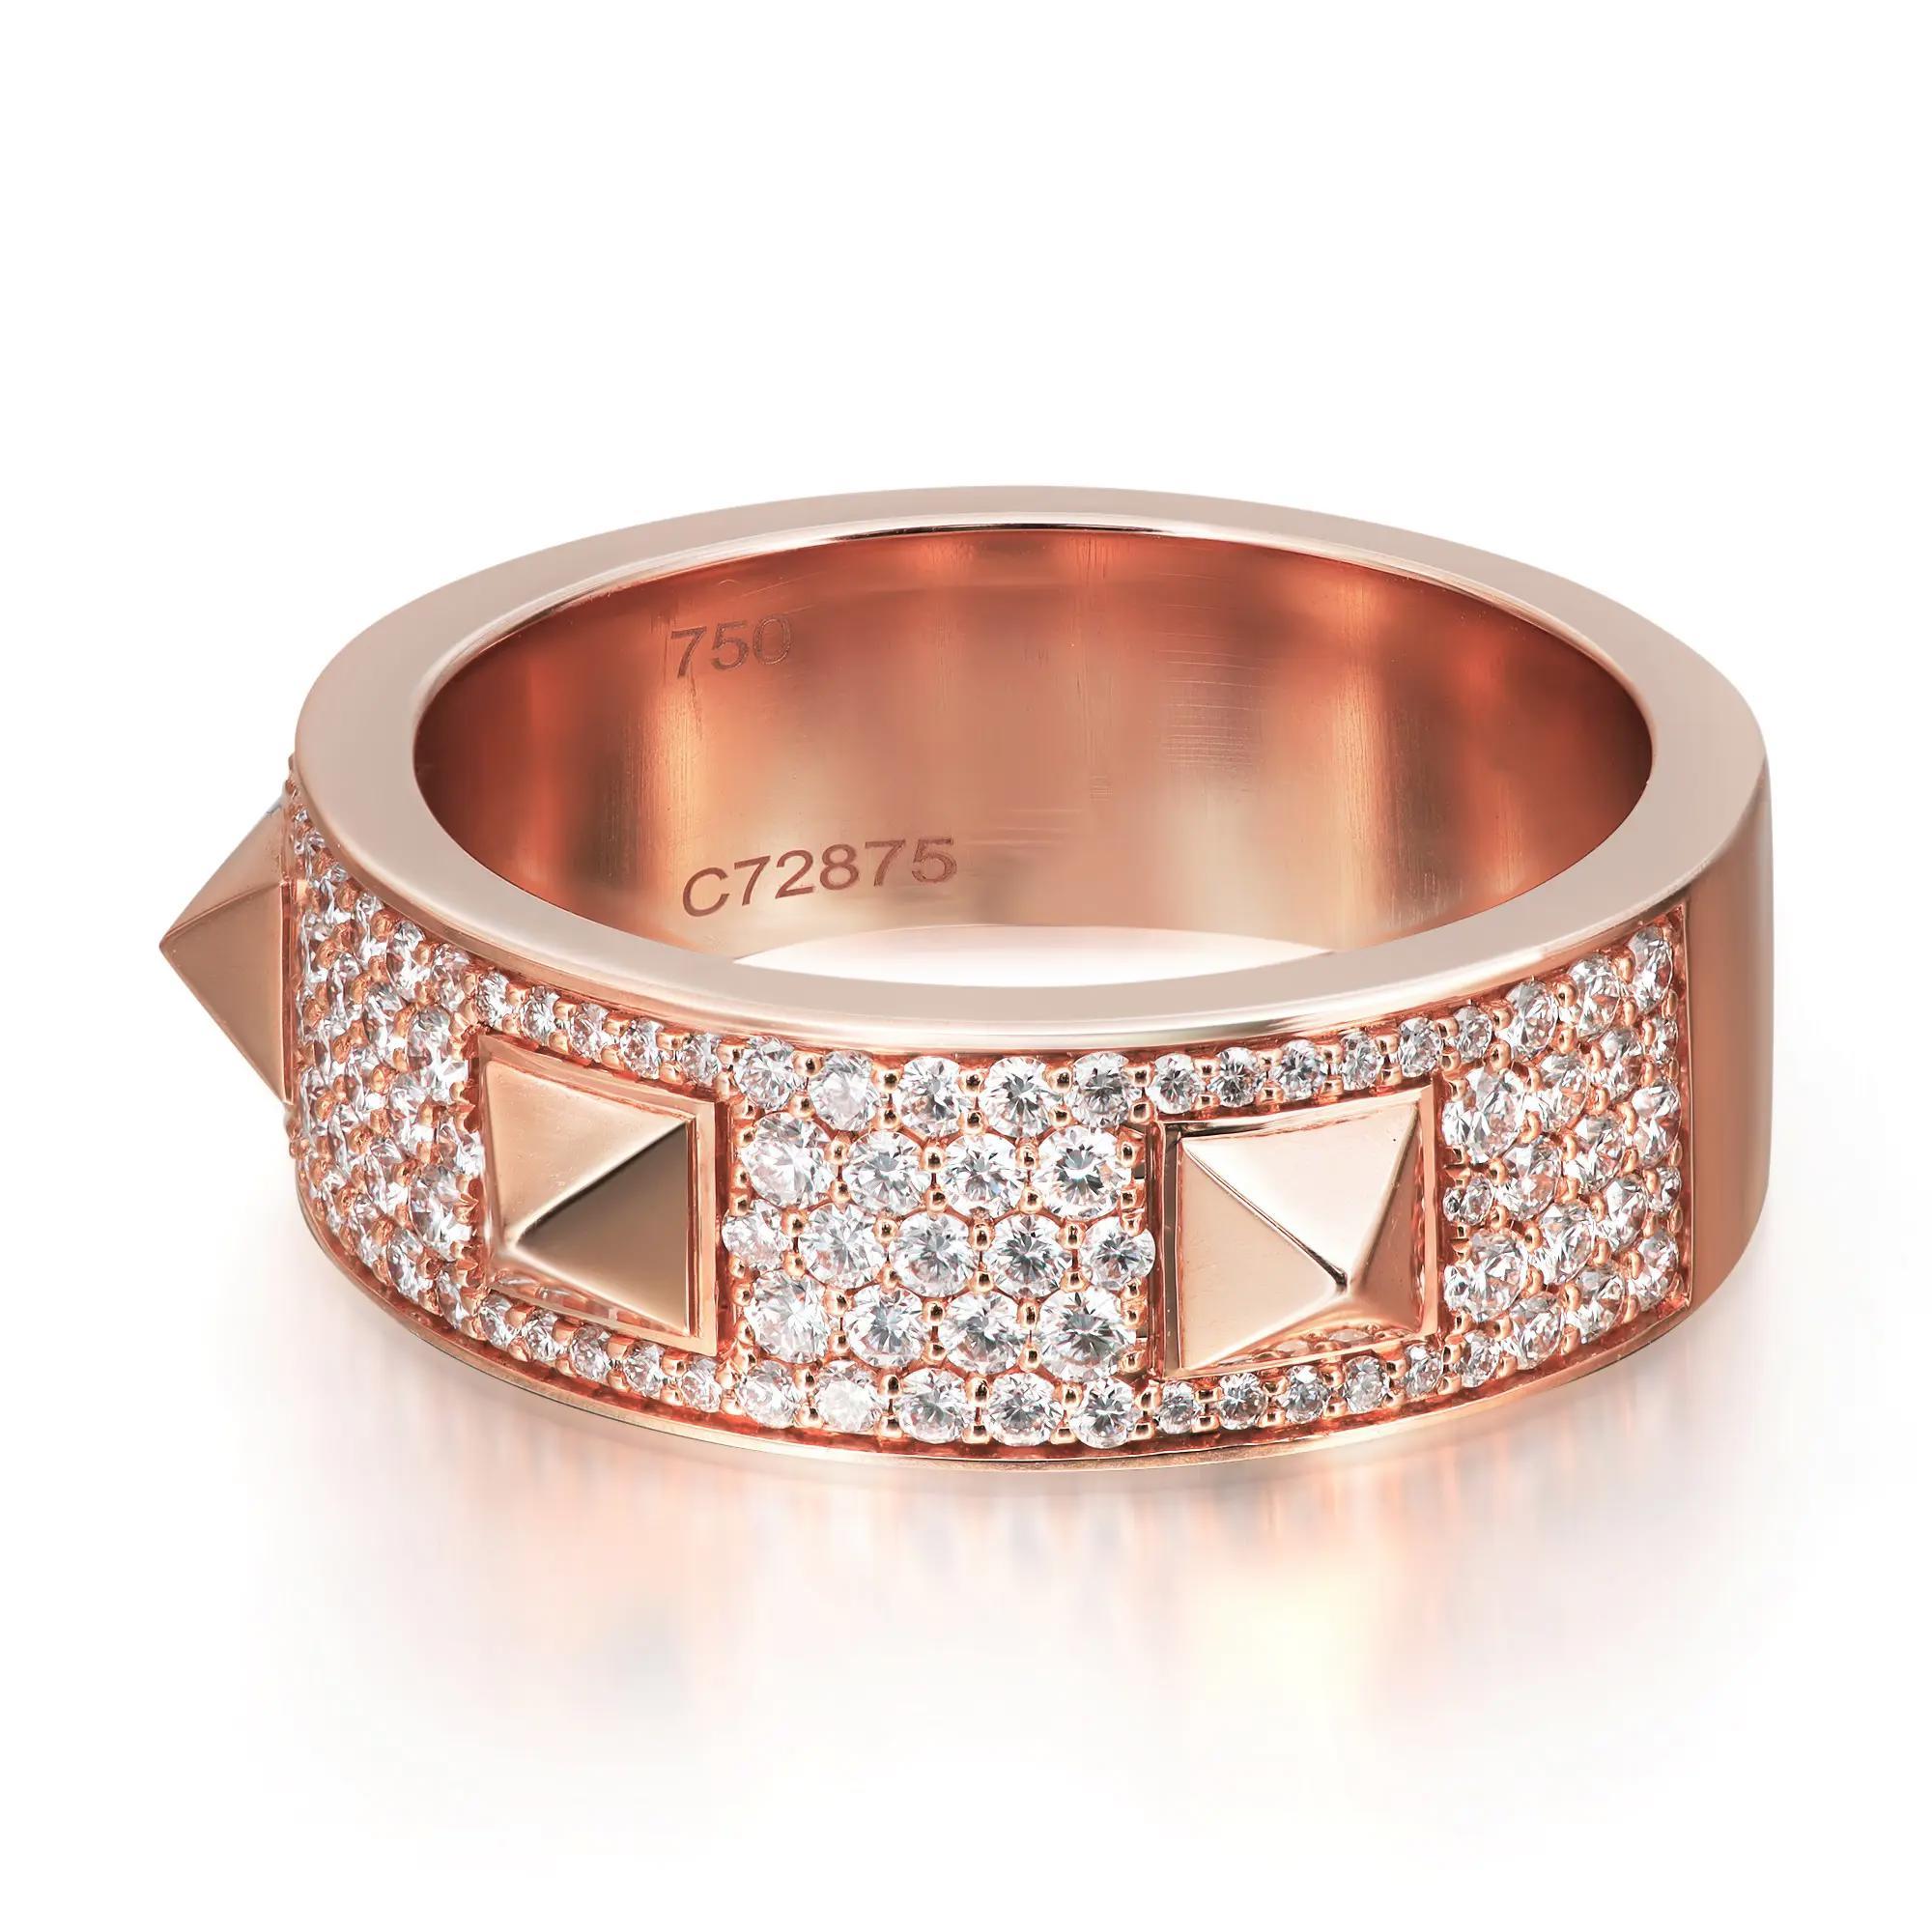 Bold and contemporary, Messika Spiky diamond band ring. Crafted in lustrous 18K rose gold. It features pave set round brilliant cut diamonds studded halfway through the band with three spikes giving it a unique look. Total diamond weight: 0.61